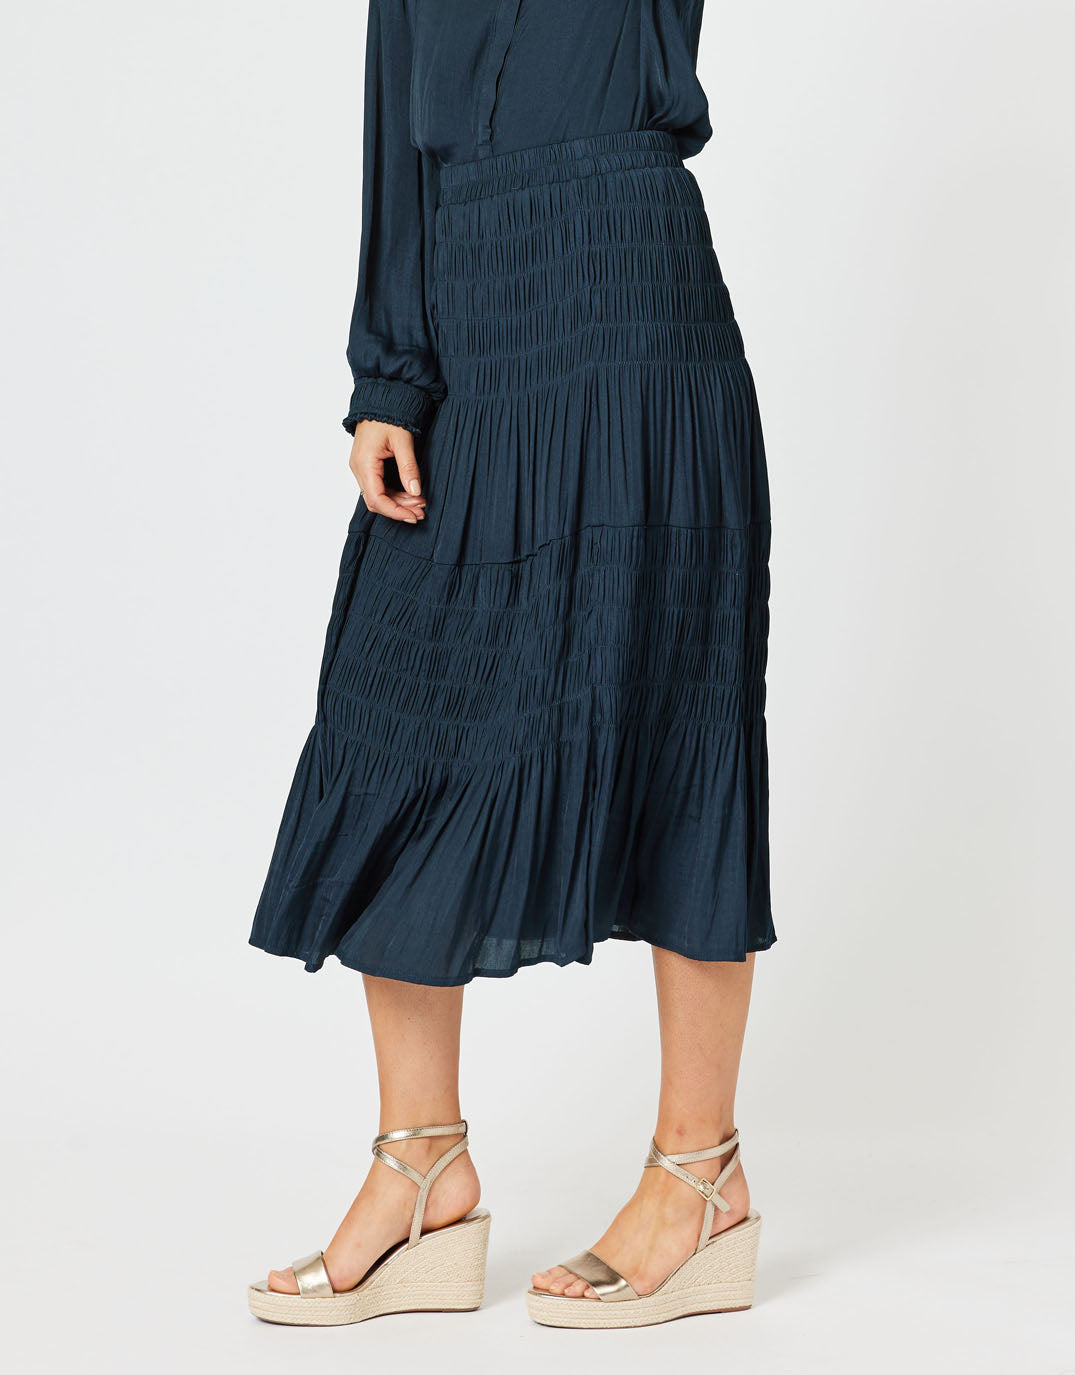 hammock-and-vine-luxe-shirred-skirt-navy-womens-clothing